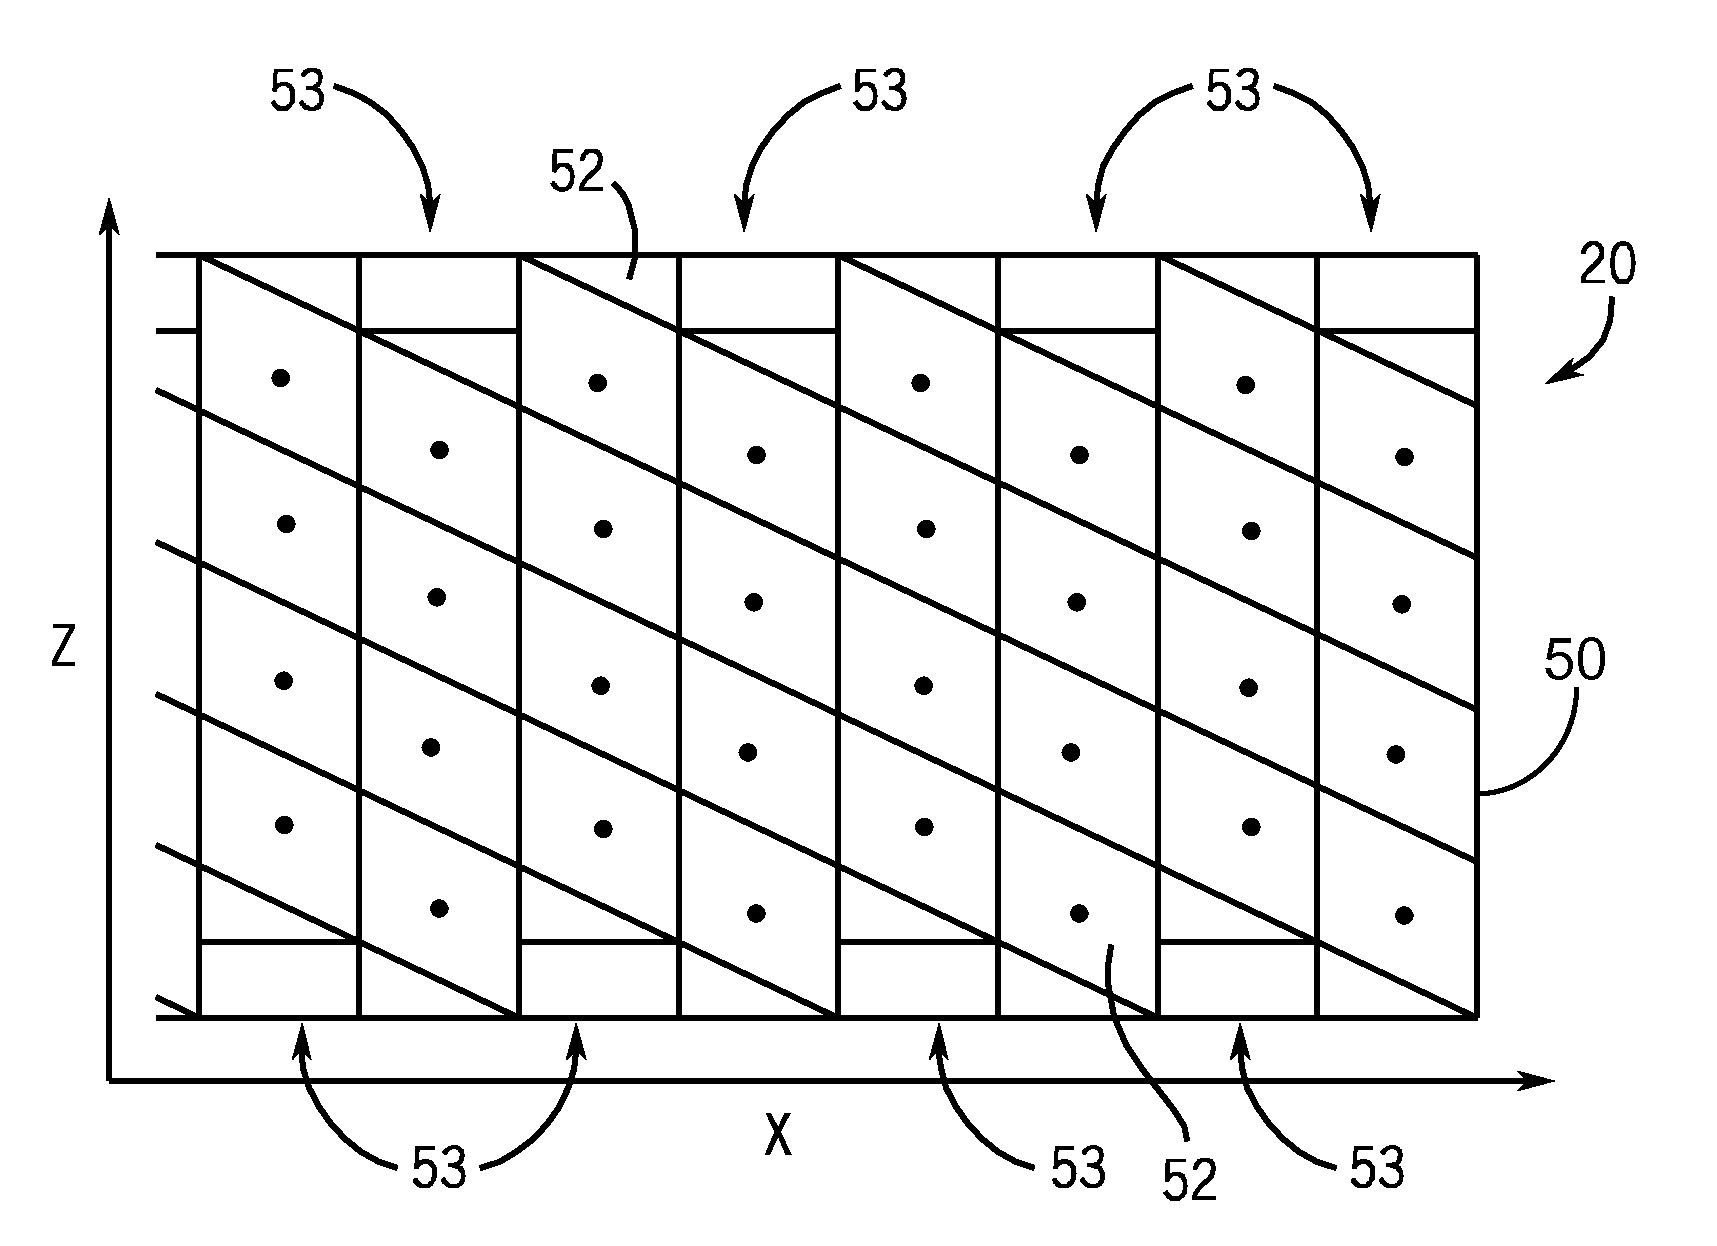 Deflection-equipped ct system with non-rectangular detector cells